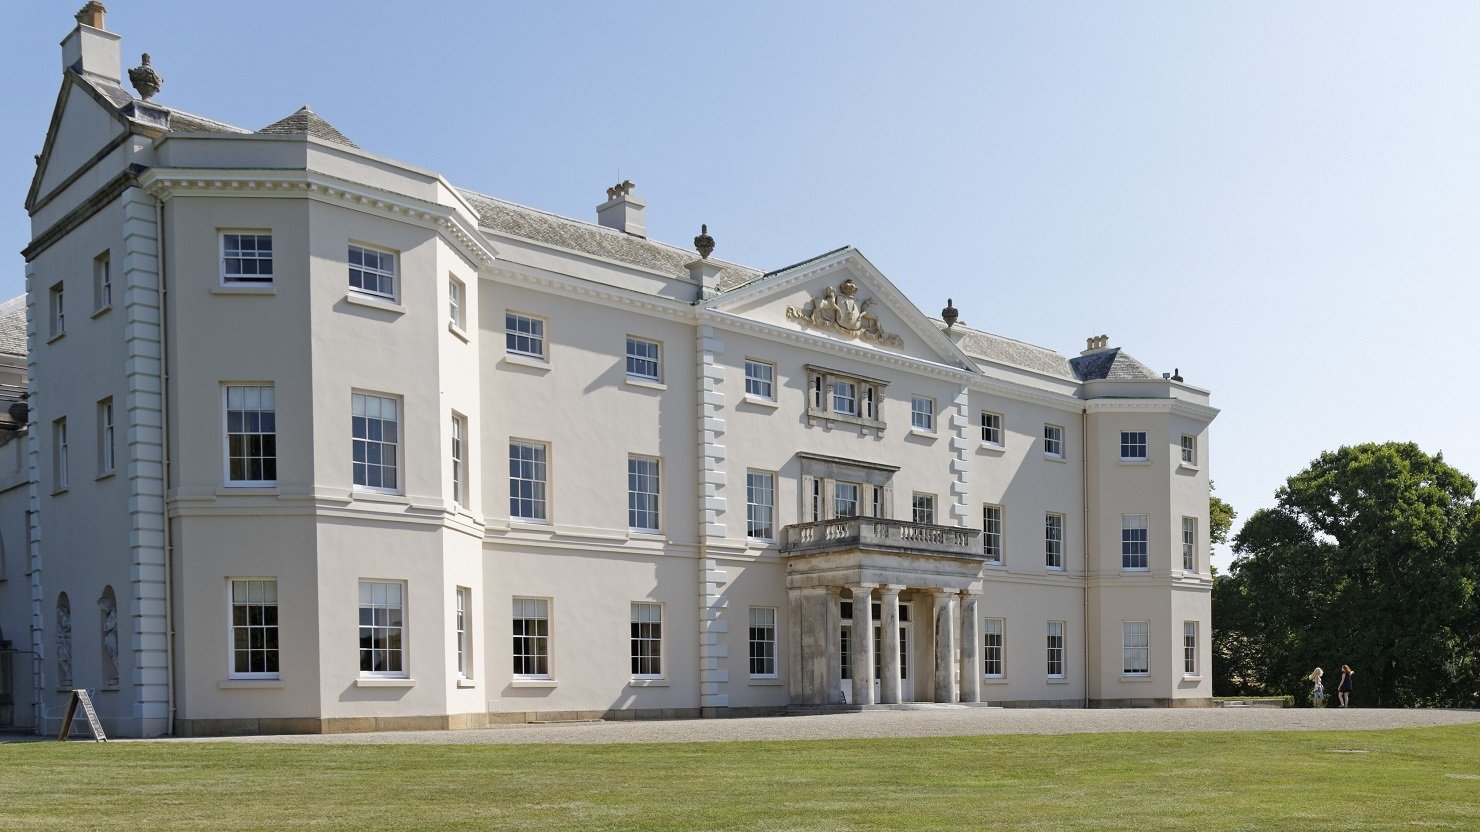 The south facade of Saltram House, Devon. Credit National Trust Images Chris Lacey